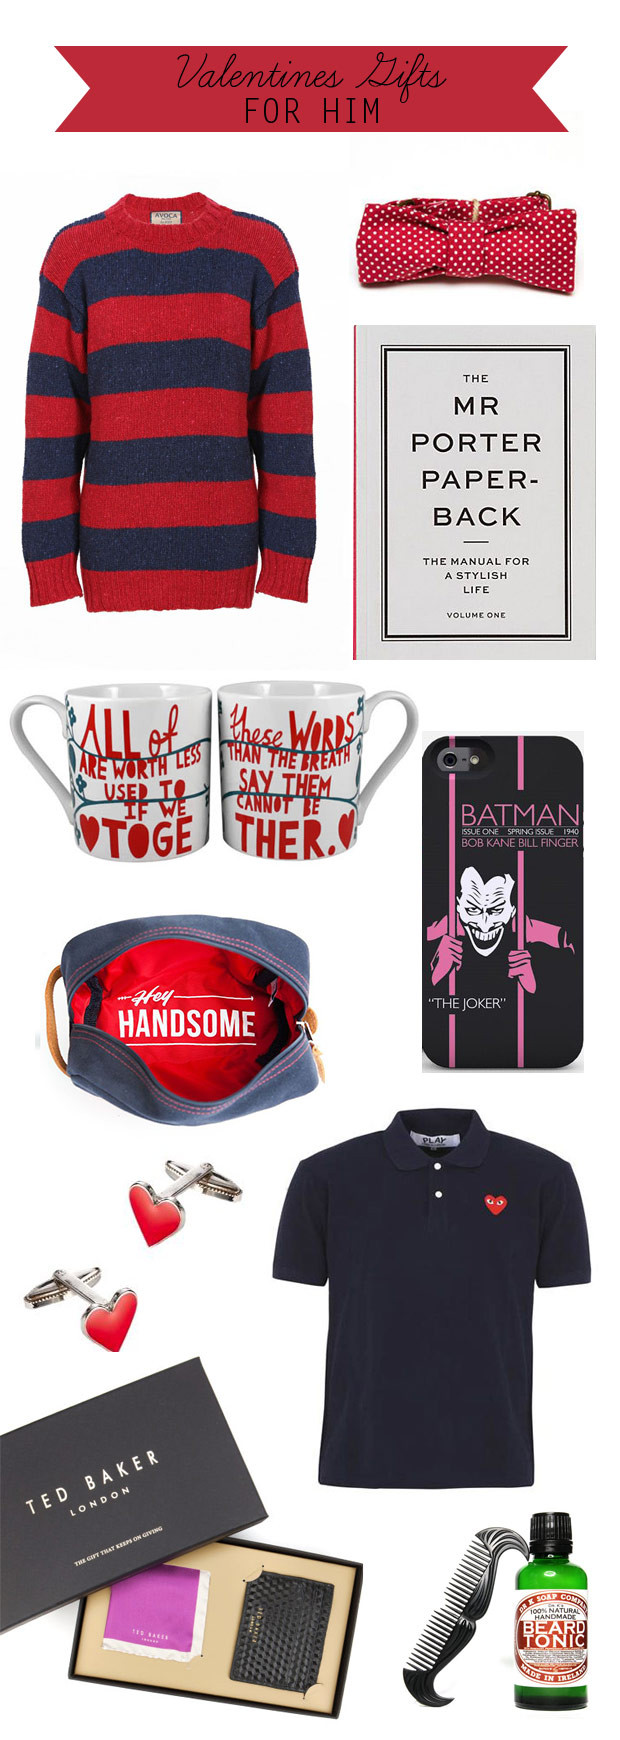 Great Valentines Day Gifts For Him
 10 Great Valentine s Gifts for Him Stuff We Love